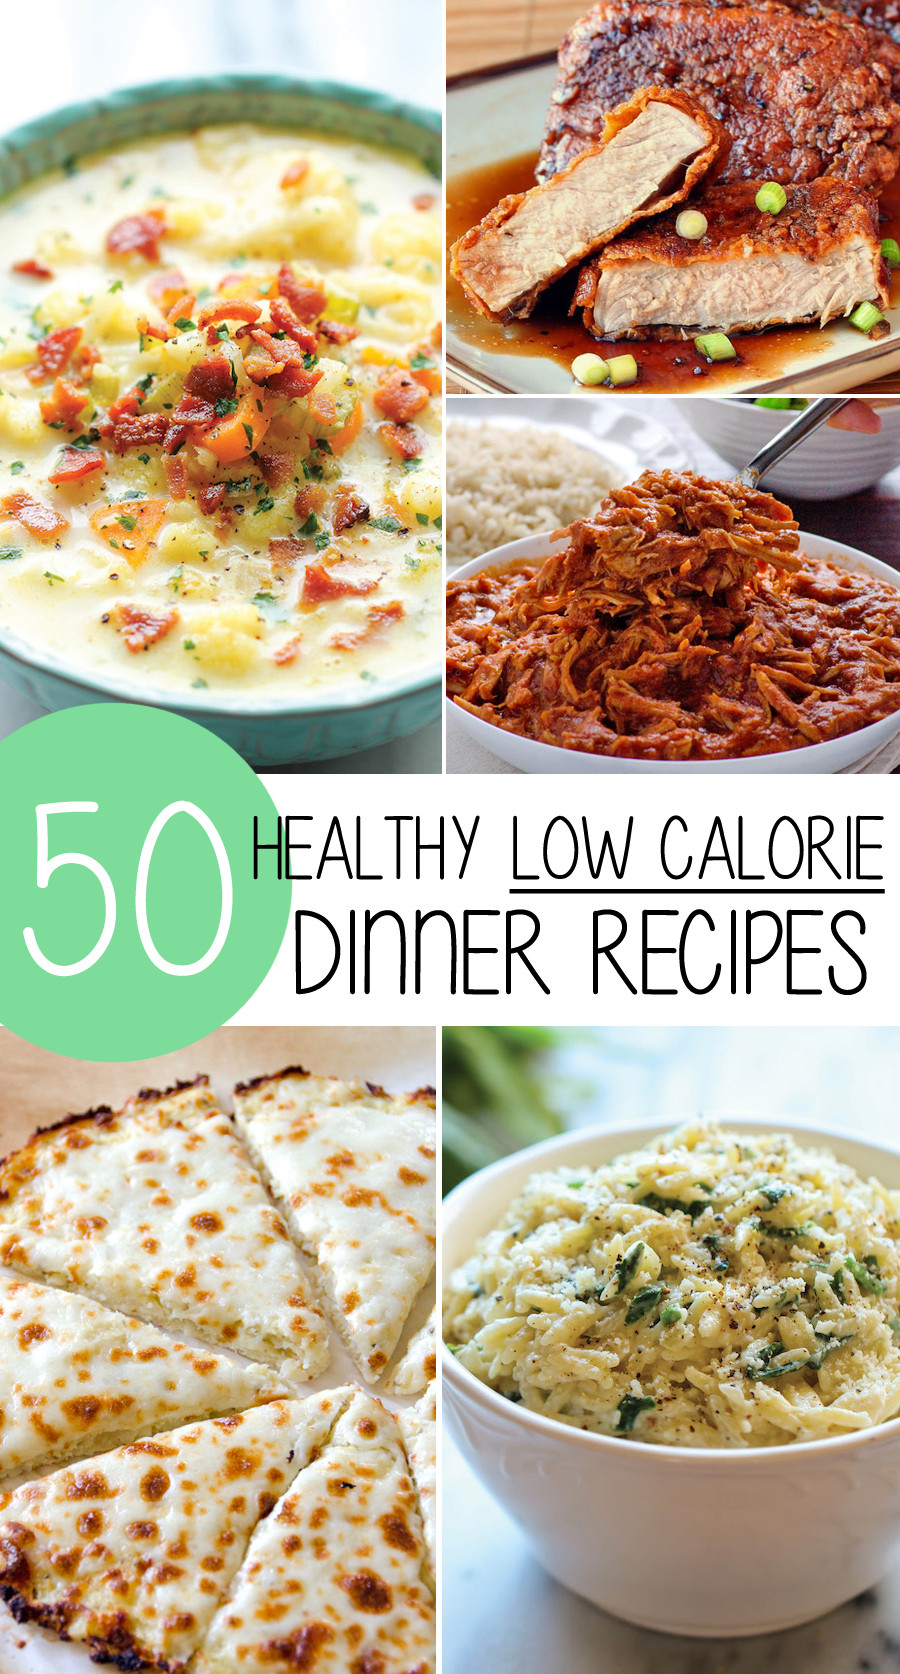 Low Calorie Diet Meals
 50 Healthy Low Calorie Weight Loss Dinner Recipes